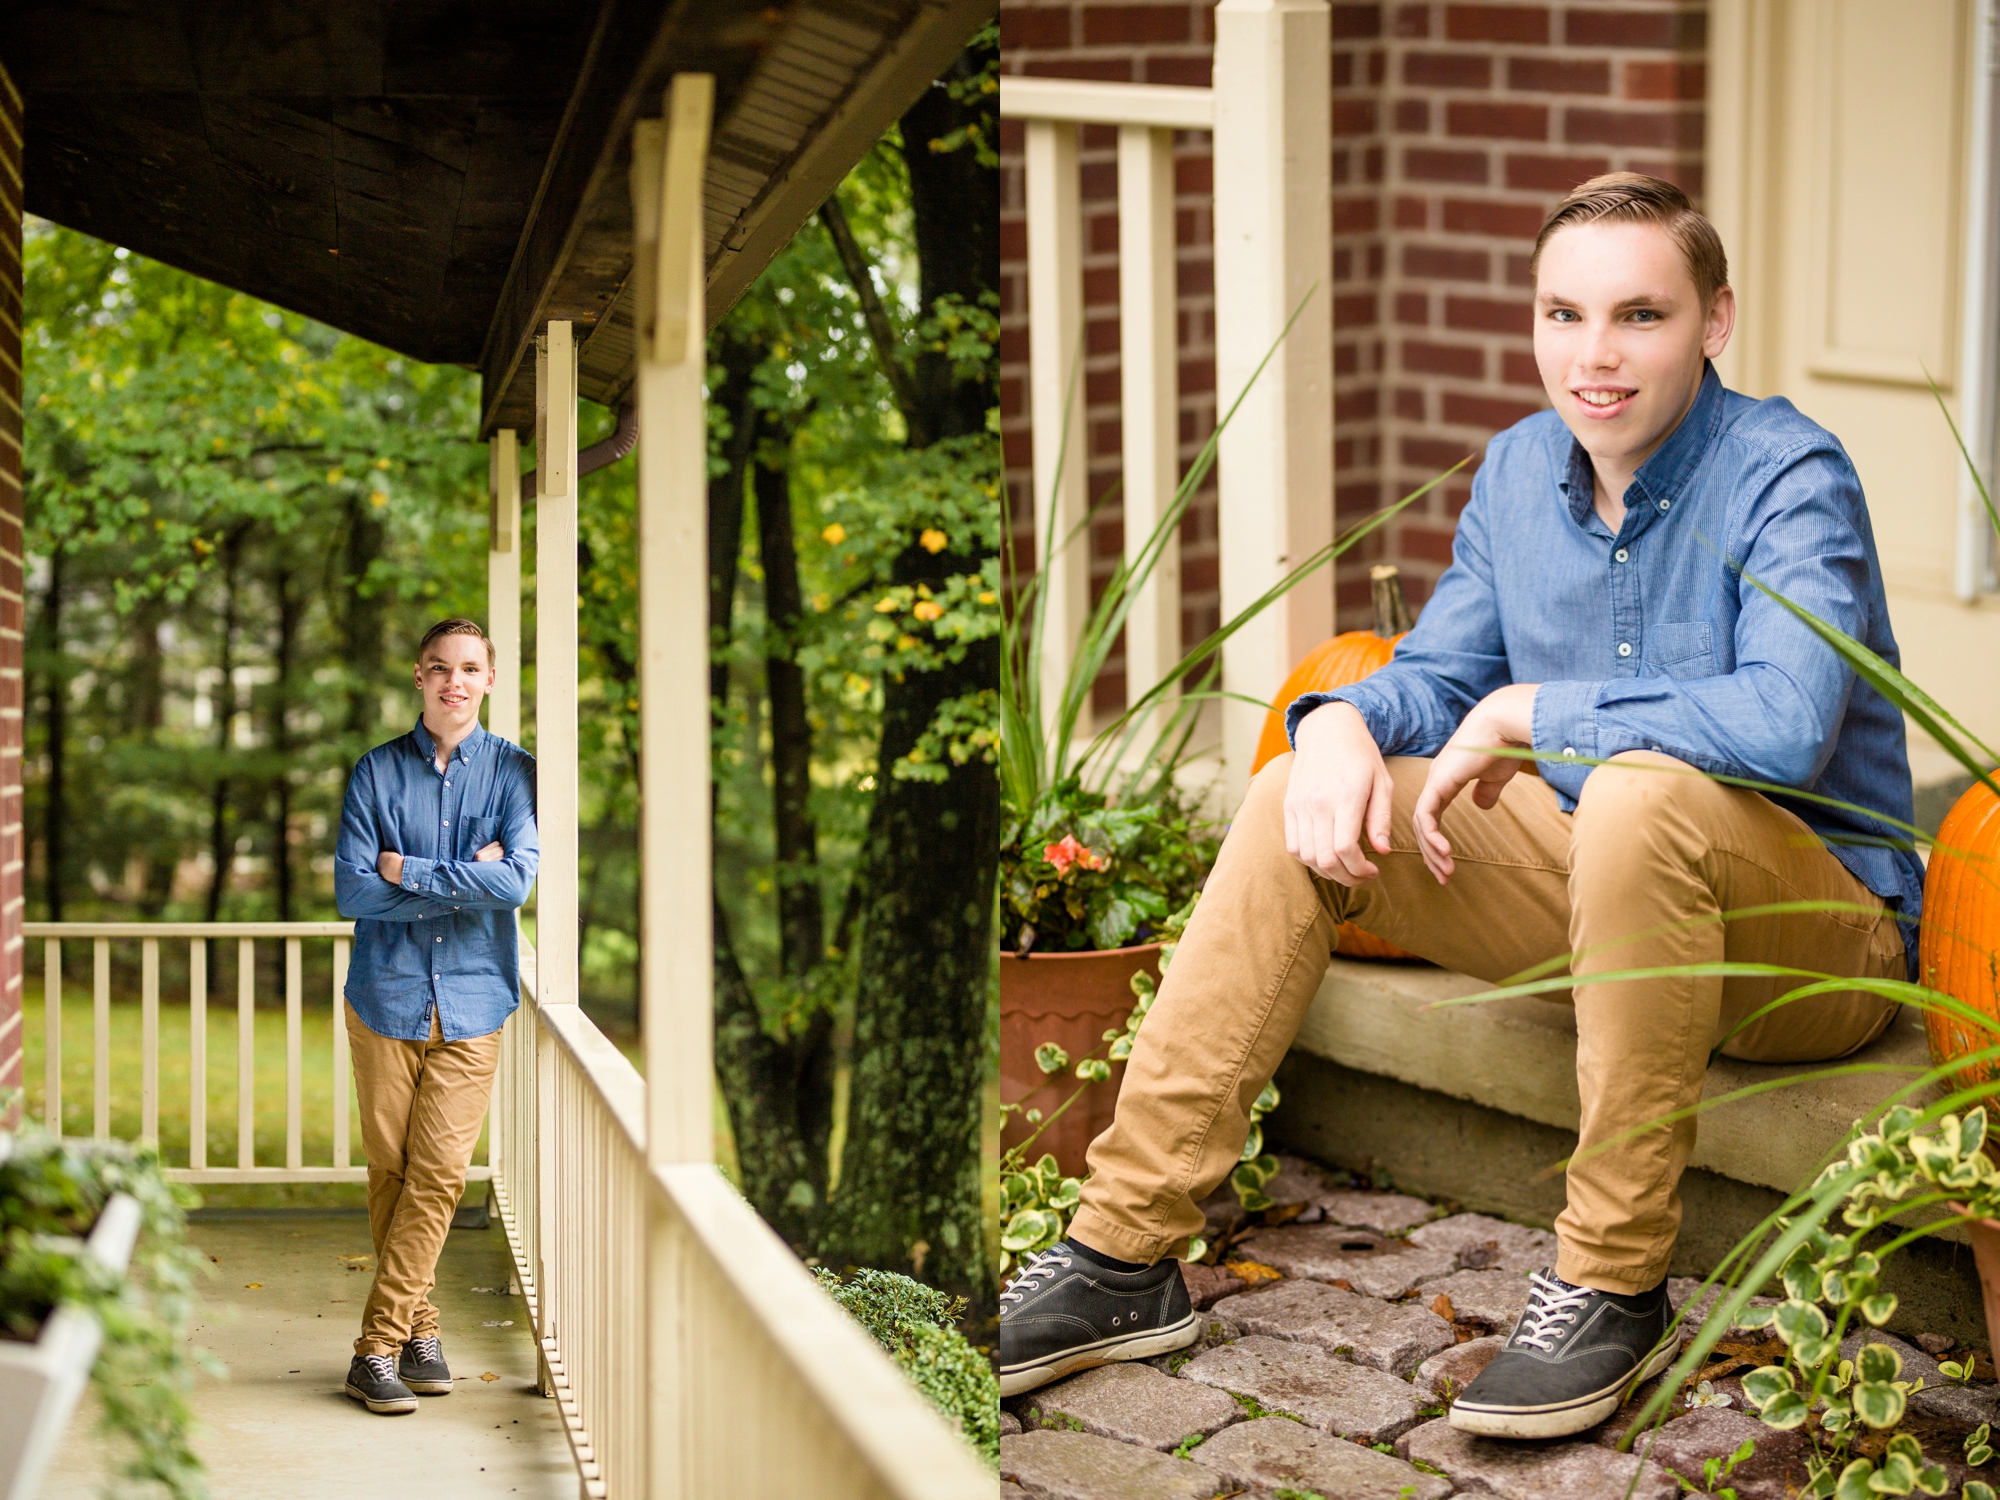 cranberry township senior photos, best places for senior photos in pittsburgh, best locations for senior photos in pittsburgh, pittsburgh senior photographer, cranberry township senior photographer